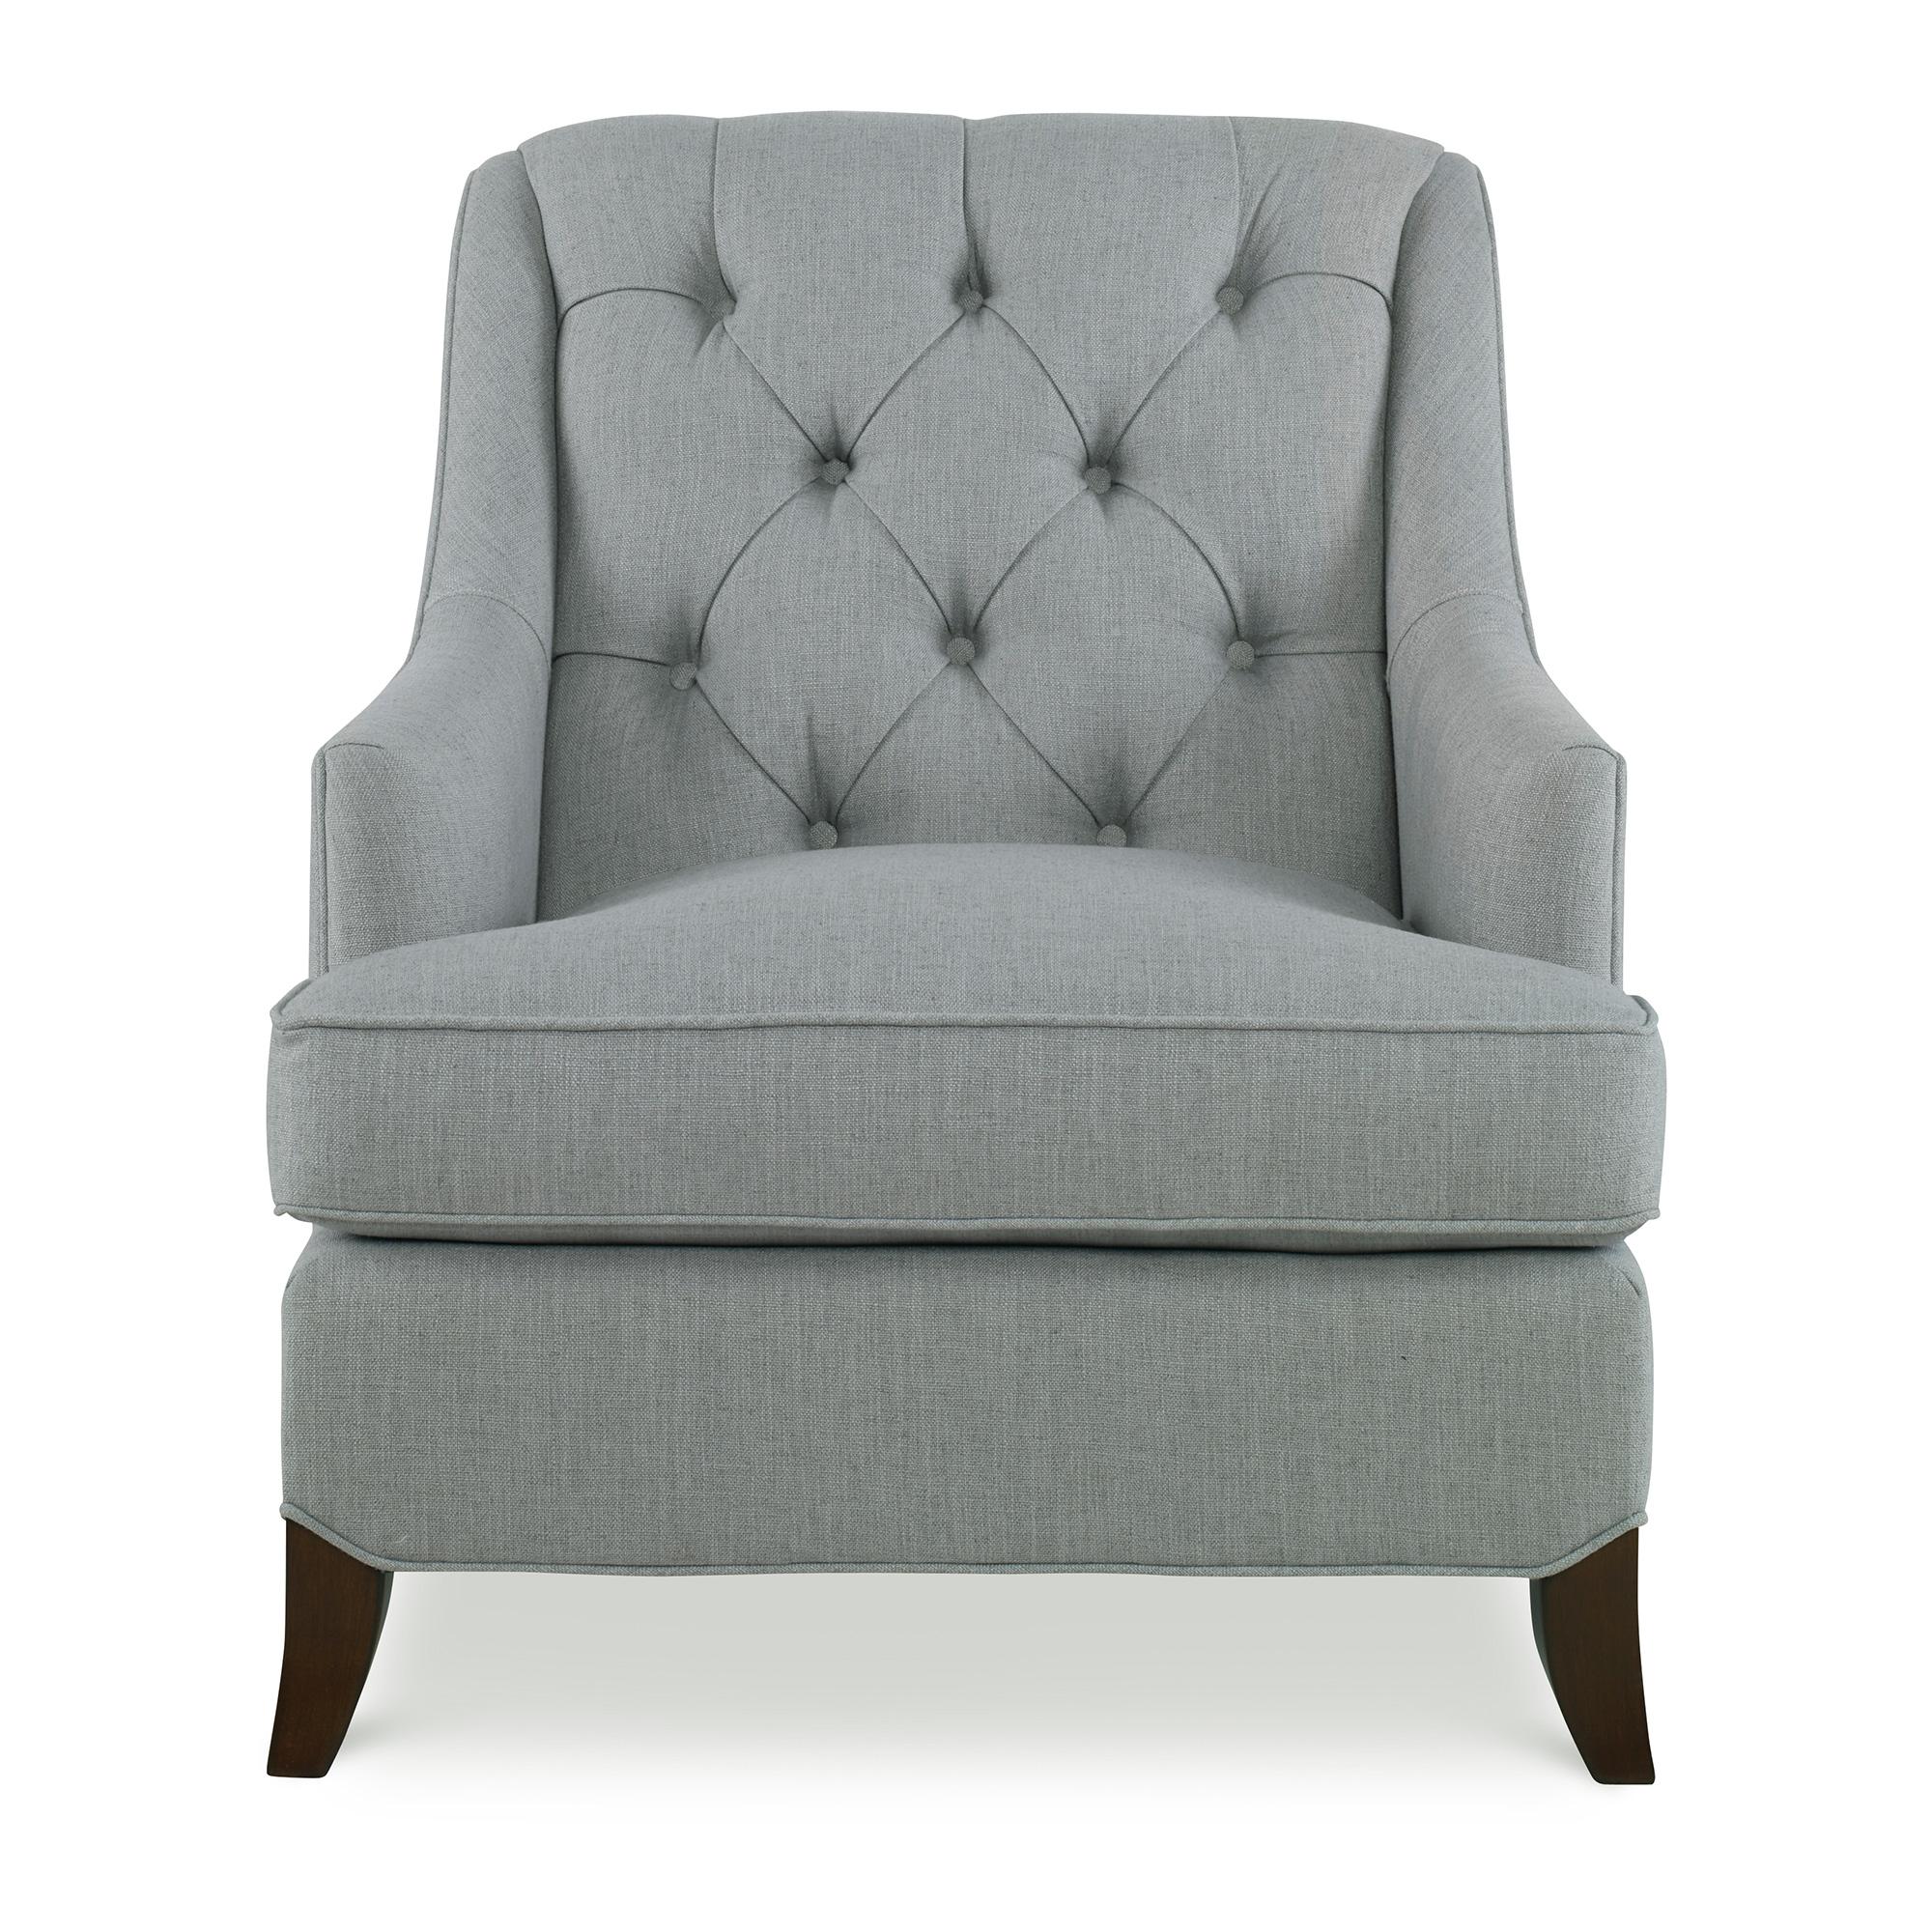 Medley chair (12T G 89 W) upholstered in Kravet's 33140.11 grey linen blend. Featuring a timeless tufted back and sleek saber leg with hickory finish. Made in the USA.

Ready to ship.